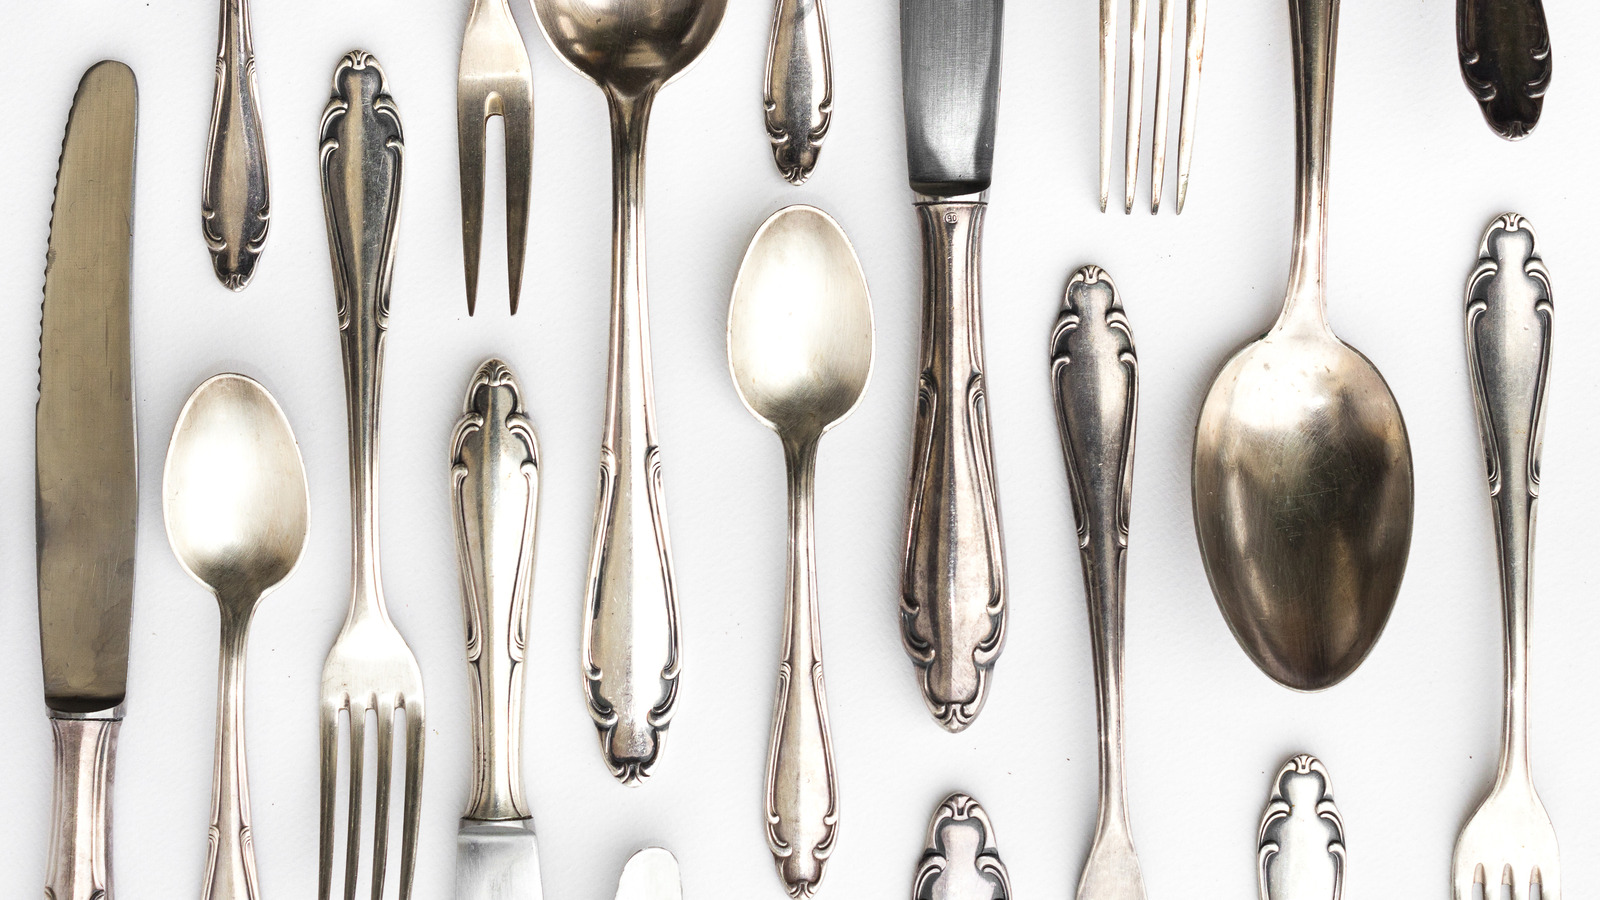 https://www.housedigest.com/img/gallery/is-your-silverware-real-silver-heres-how-to-tell/l-intro-1679683649.jpg